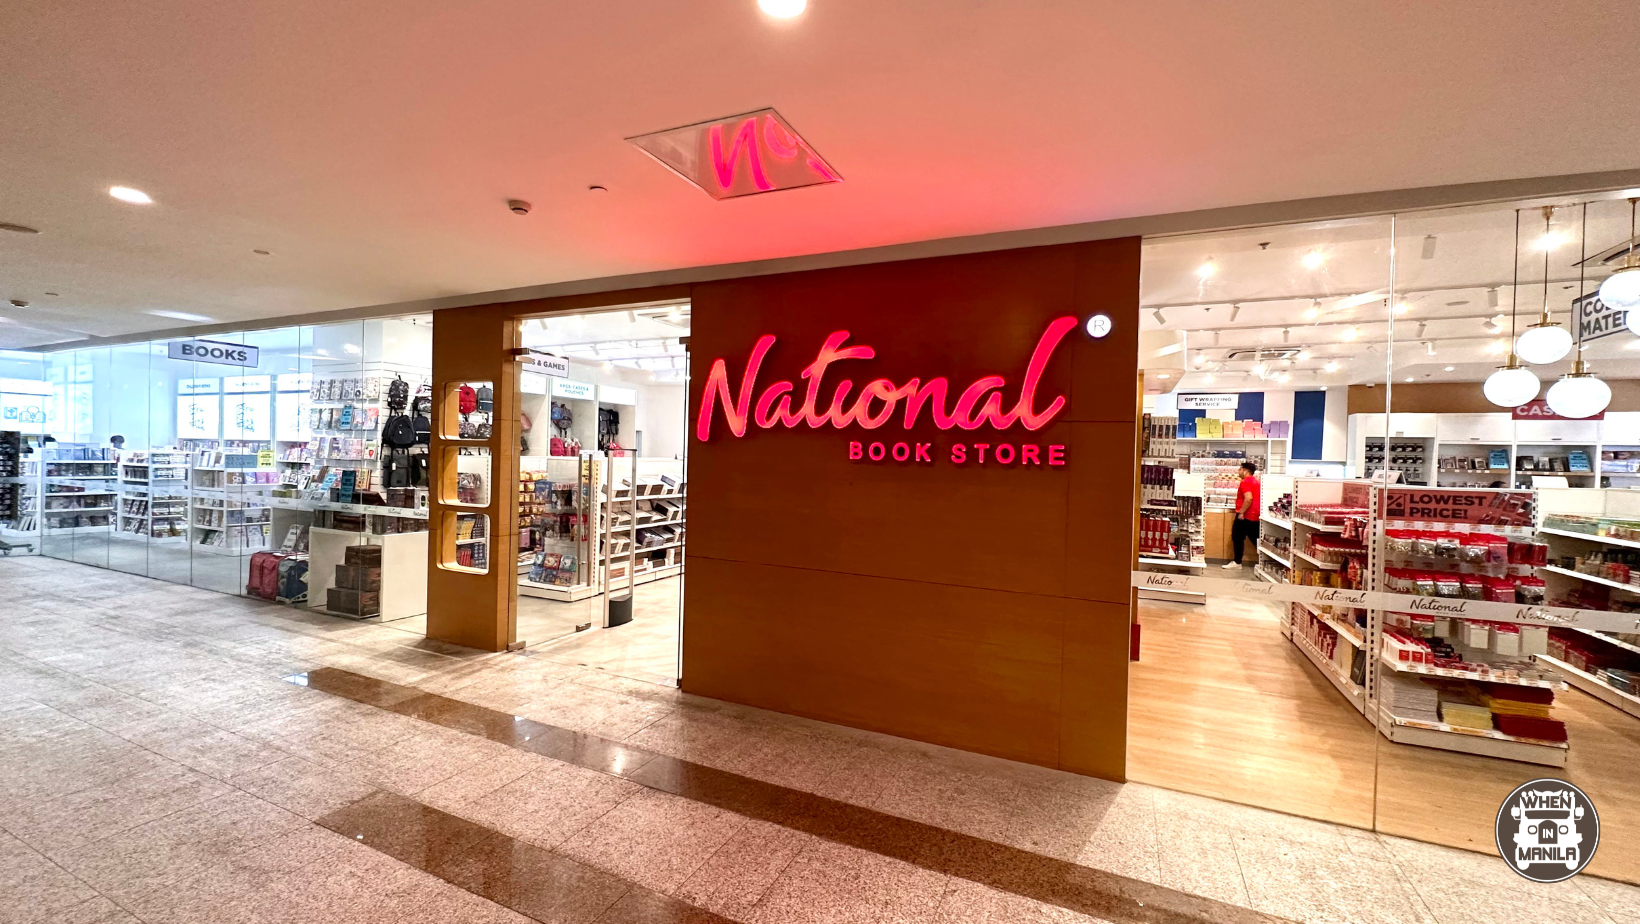 National Book Store with logo